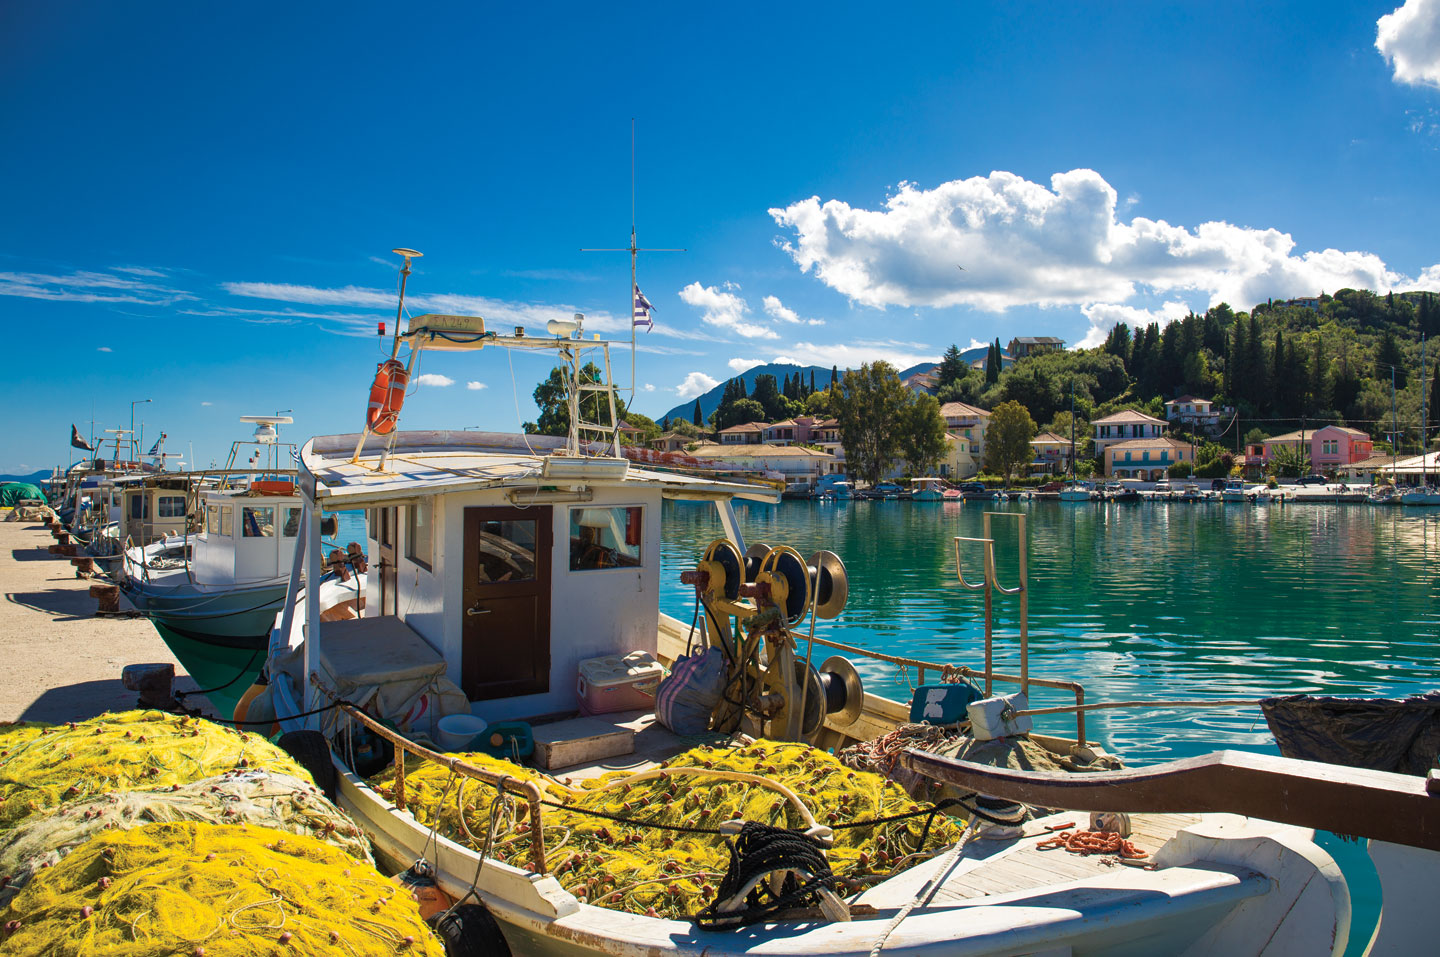 Some of the island's most famous fish taverns are to be found in Lygia, Lefkada